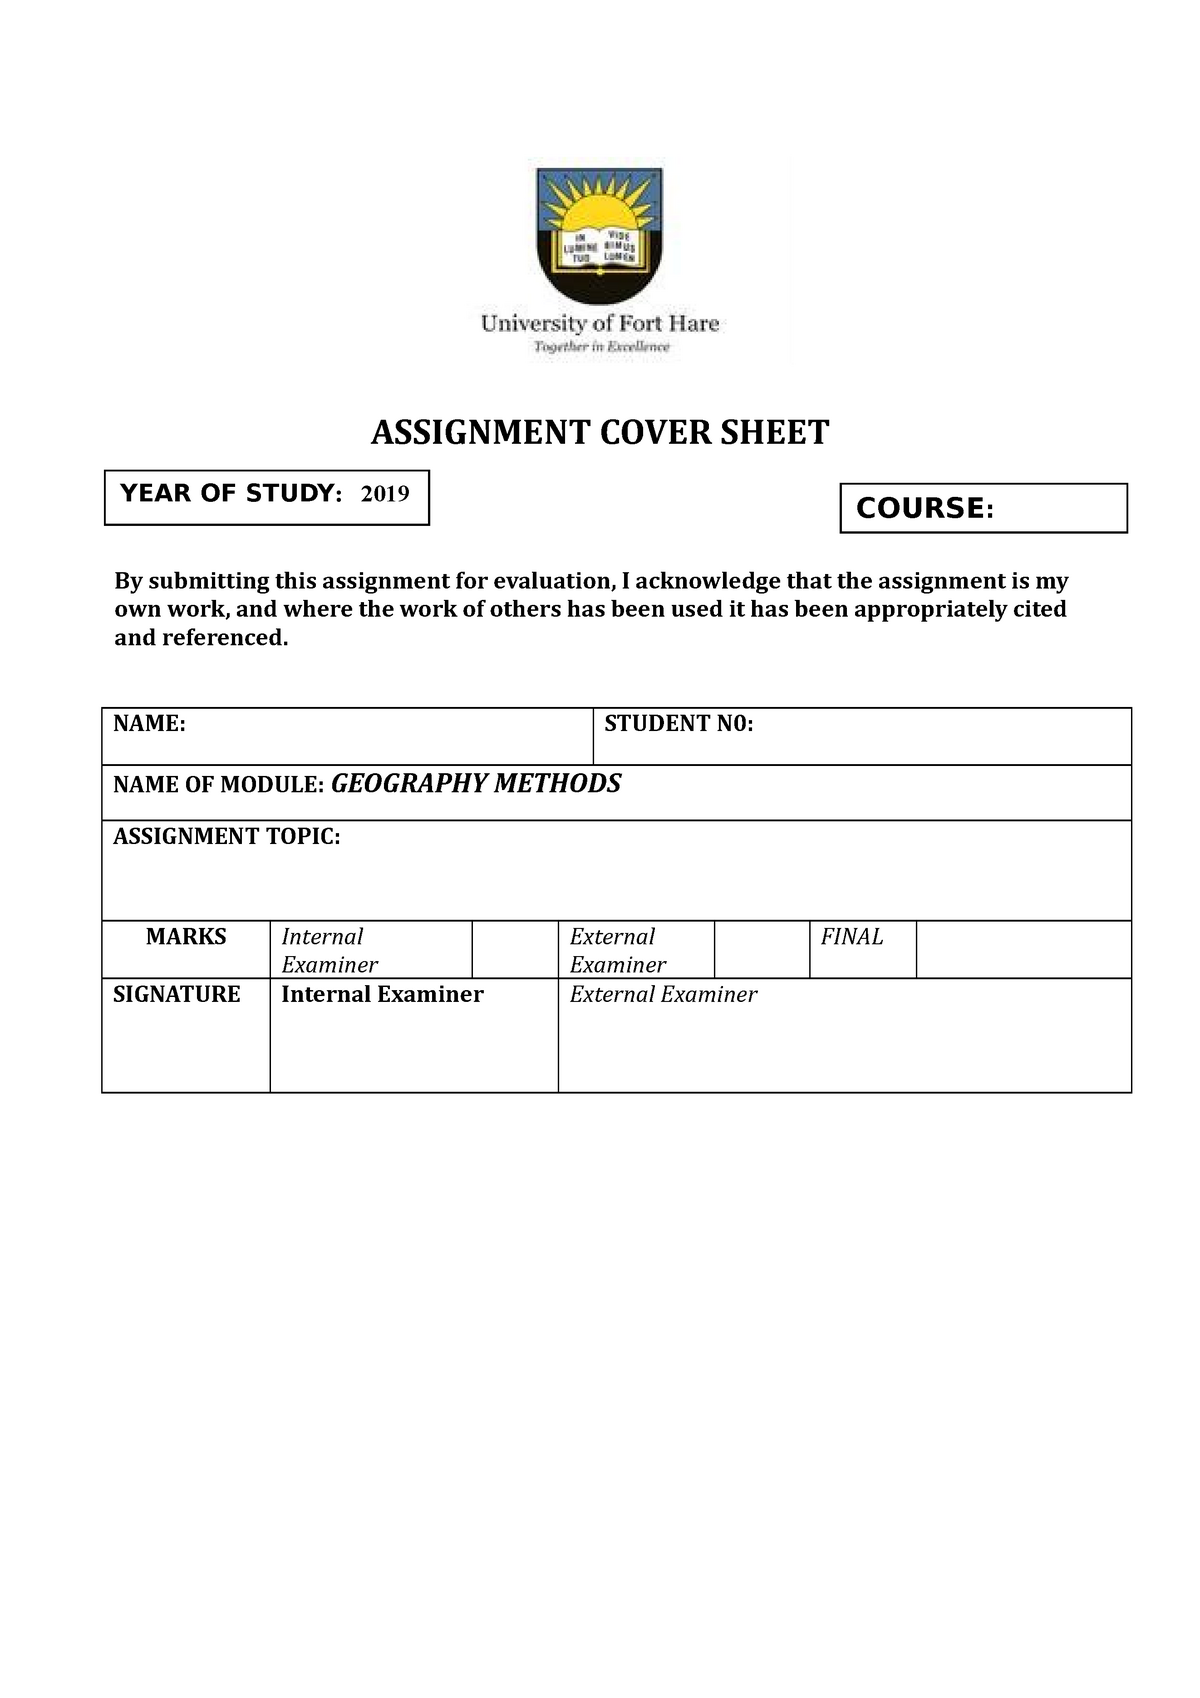 assignment cover sheet uoa